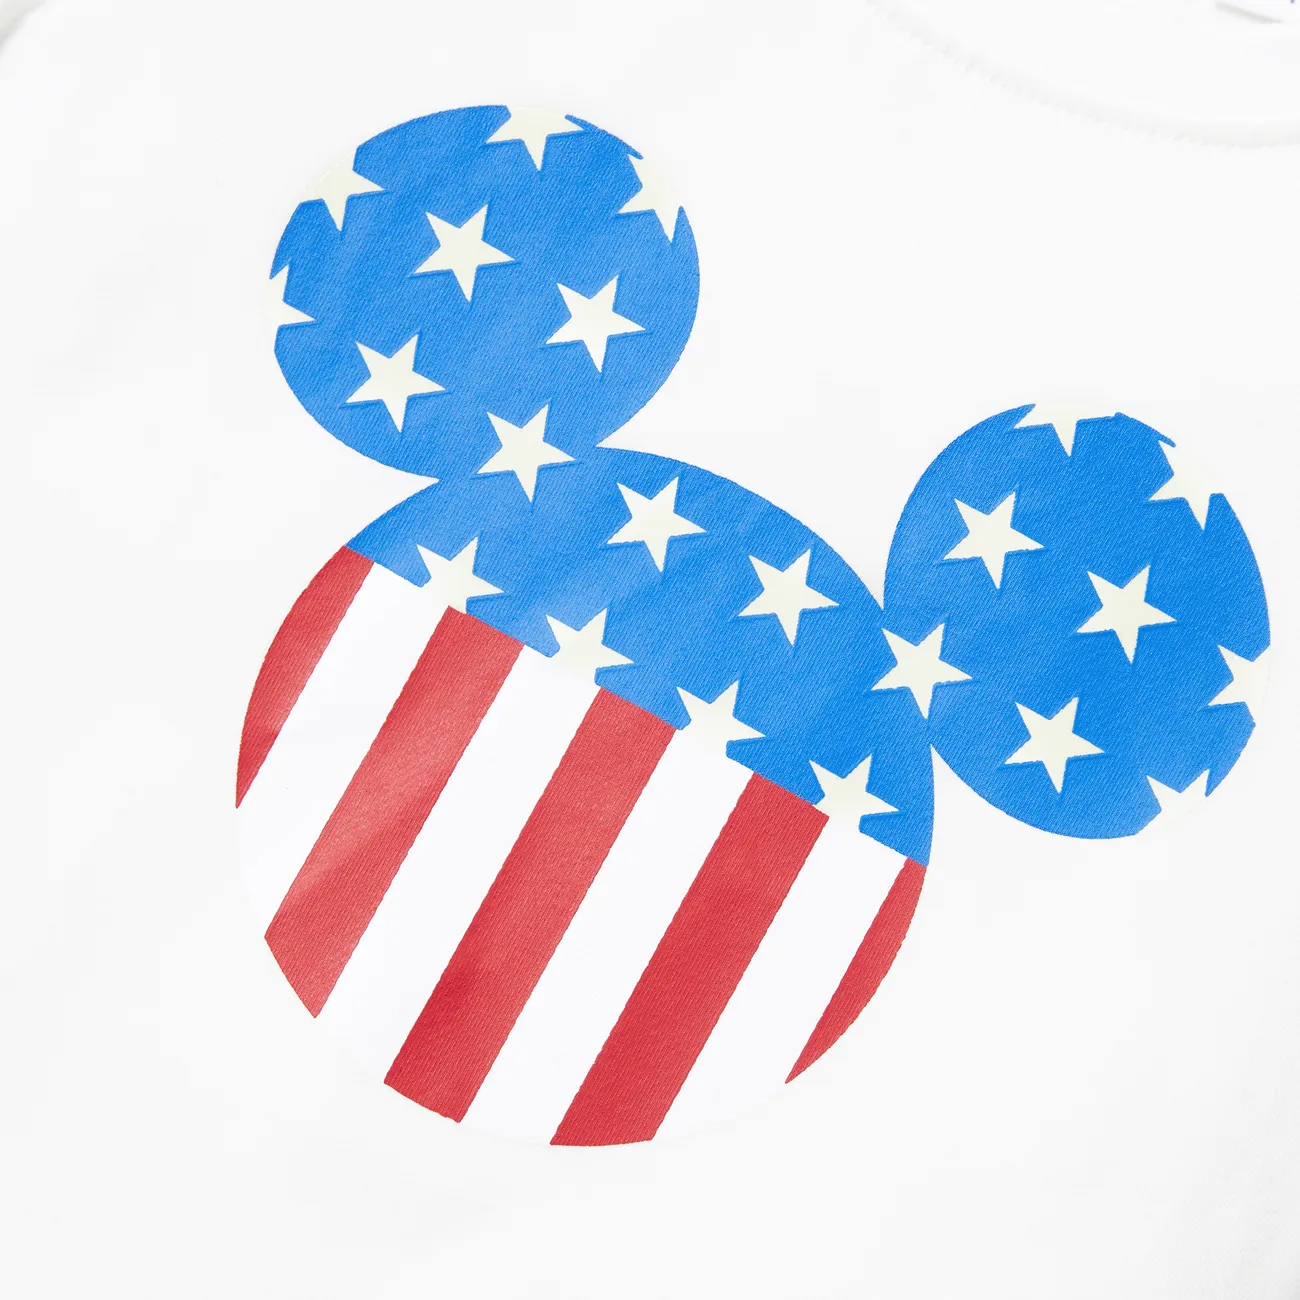 Disney Mickey and Friends Family Matching Independence Day Cotton Glow in the Dark Classic Mickey Pint Tee/Onesie White big image 1